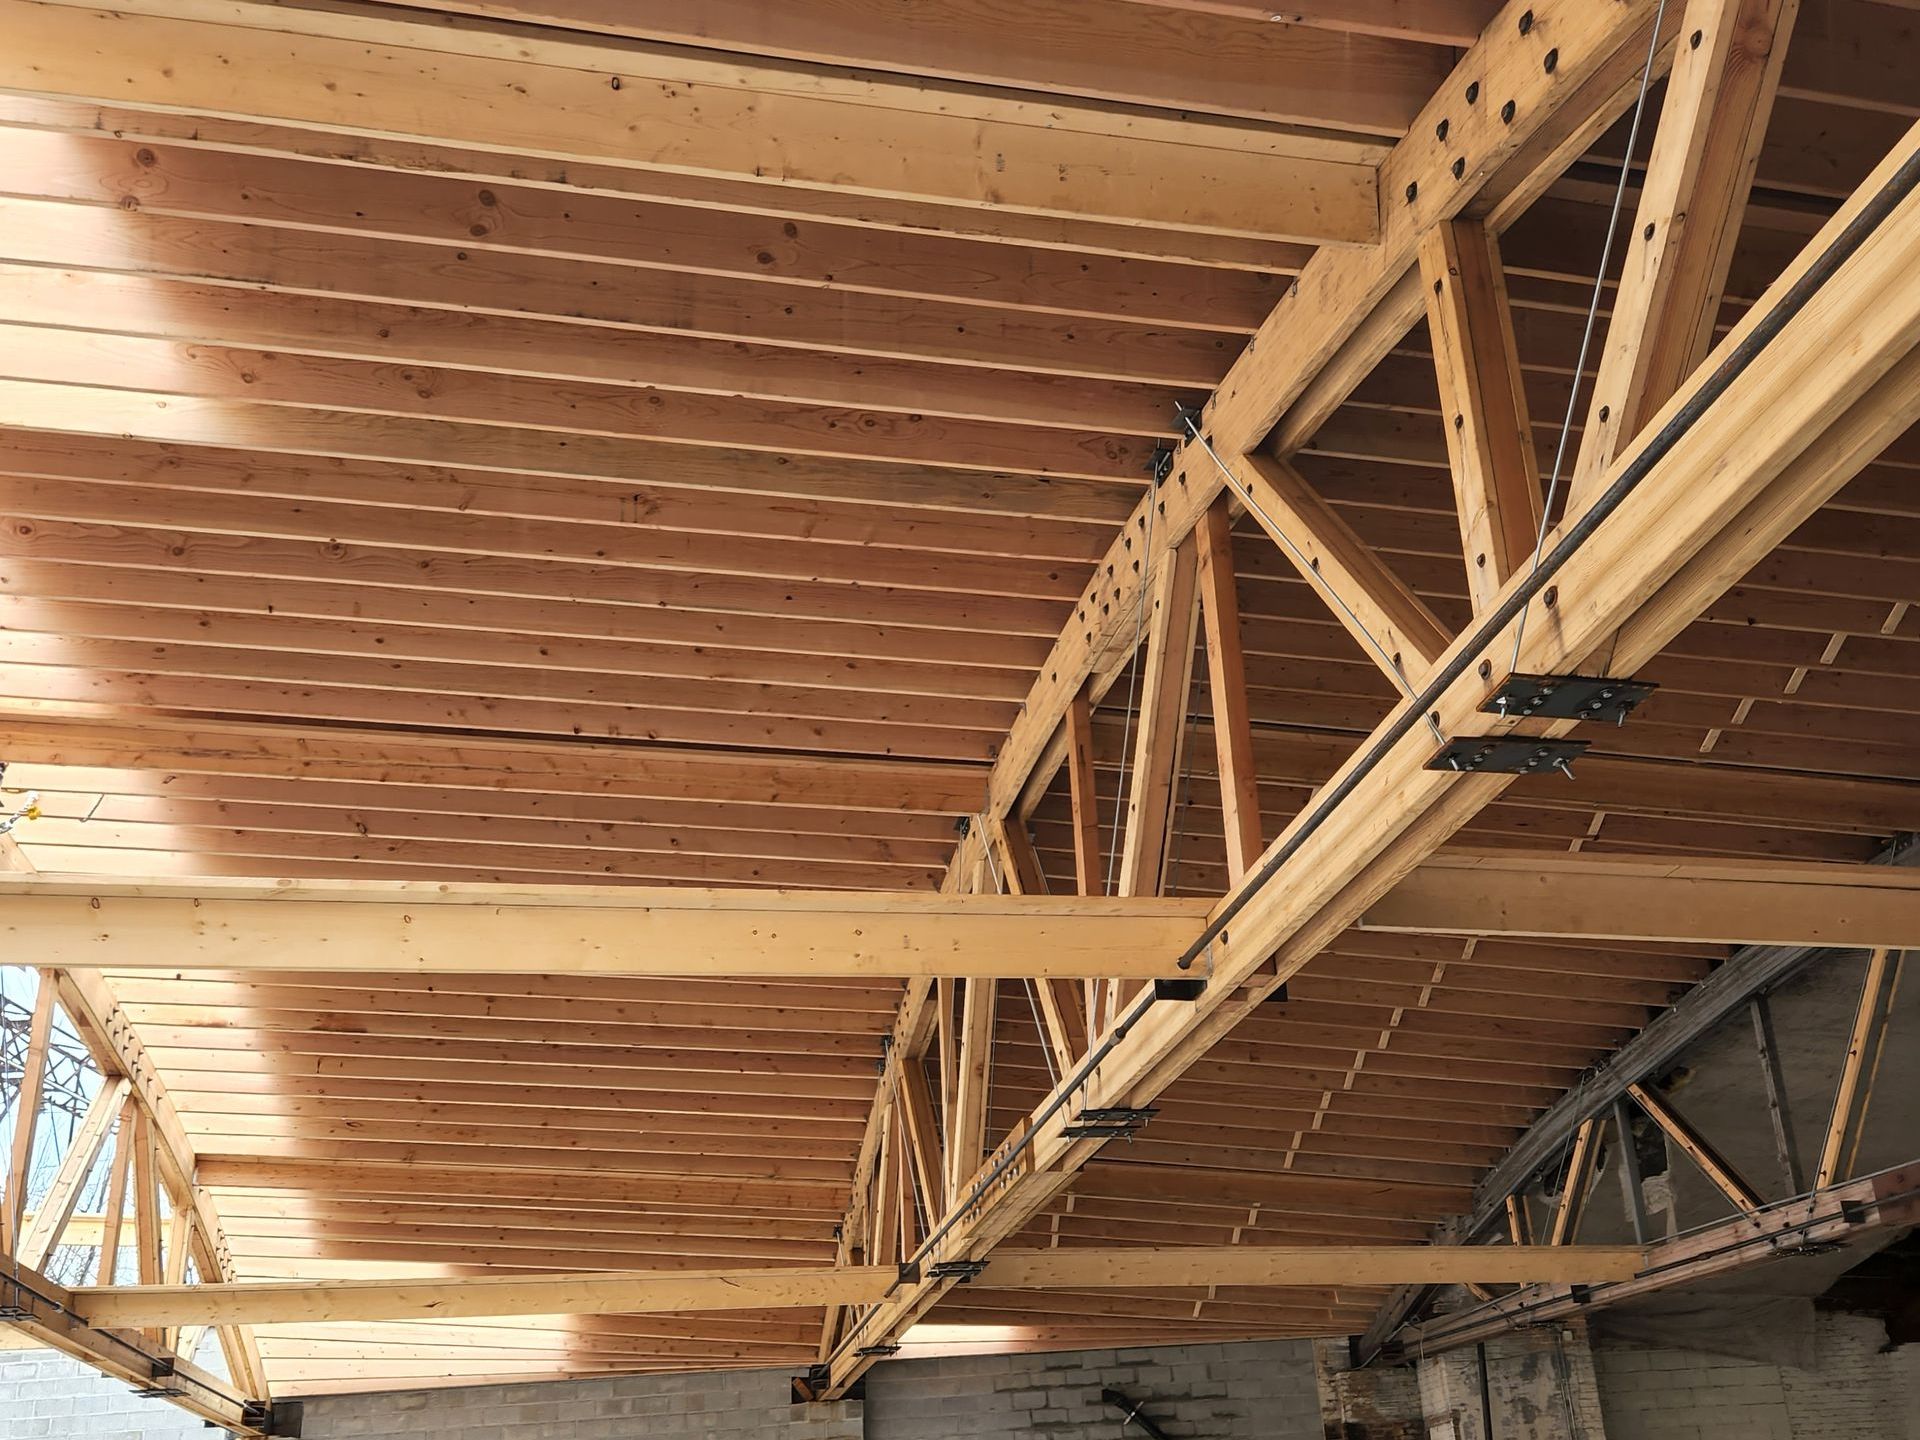 The ceiling of a building under construction is made of wood and metal.